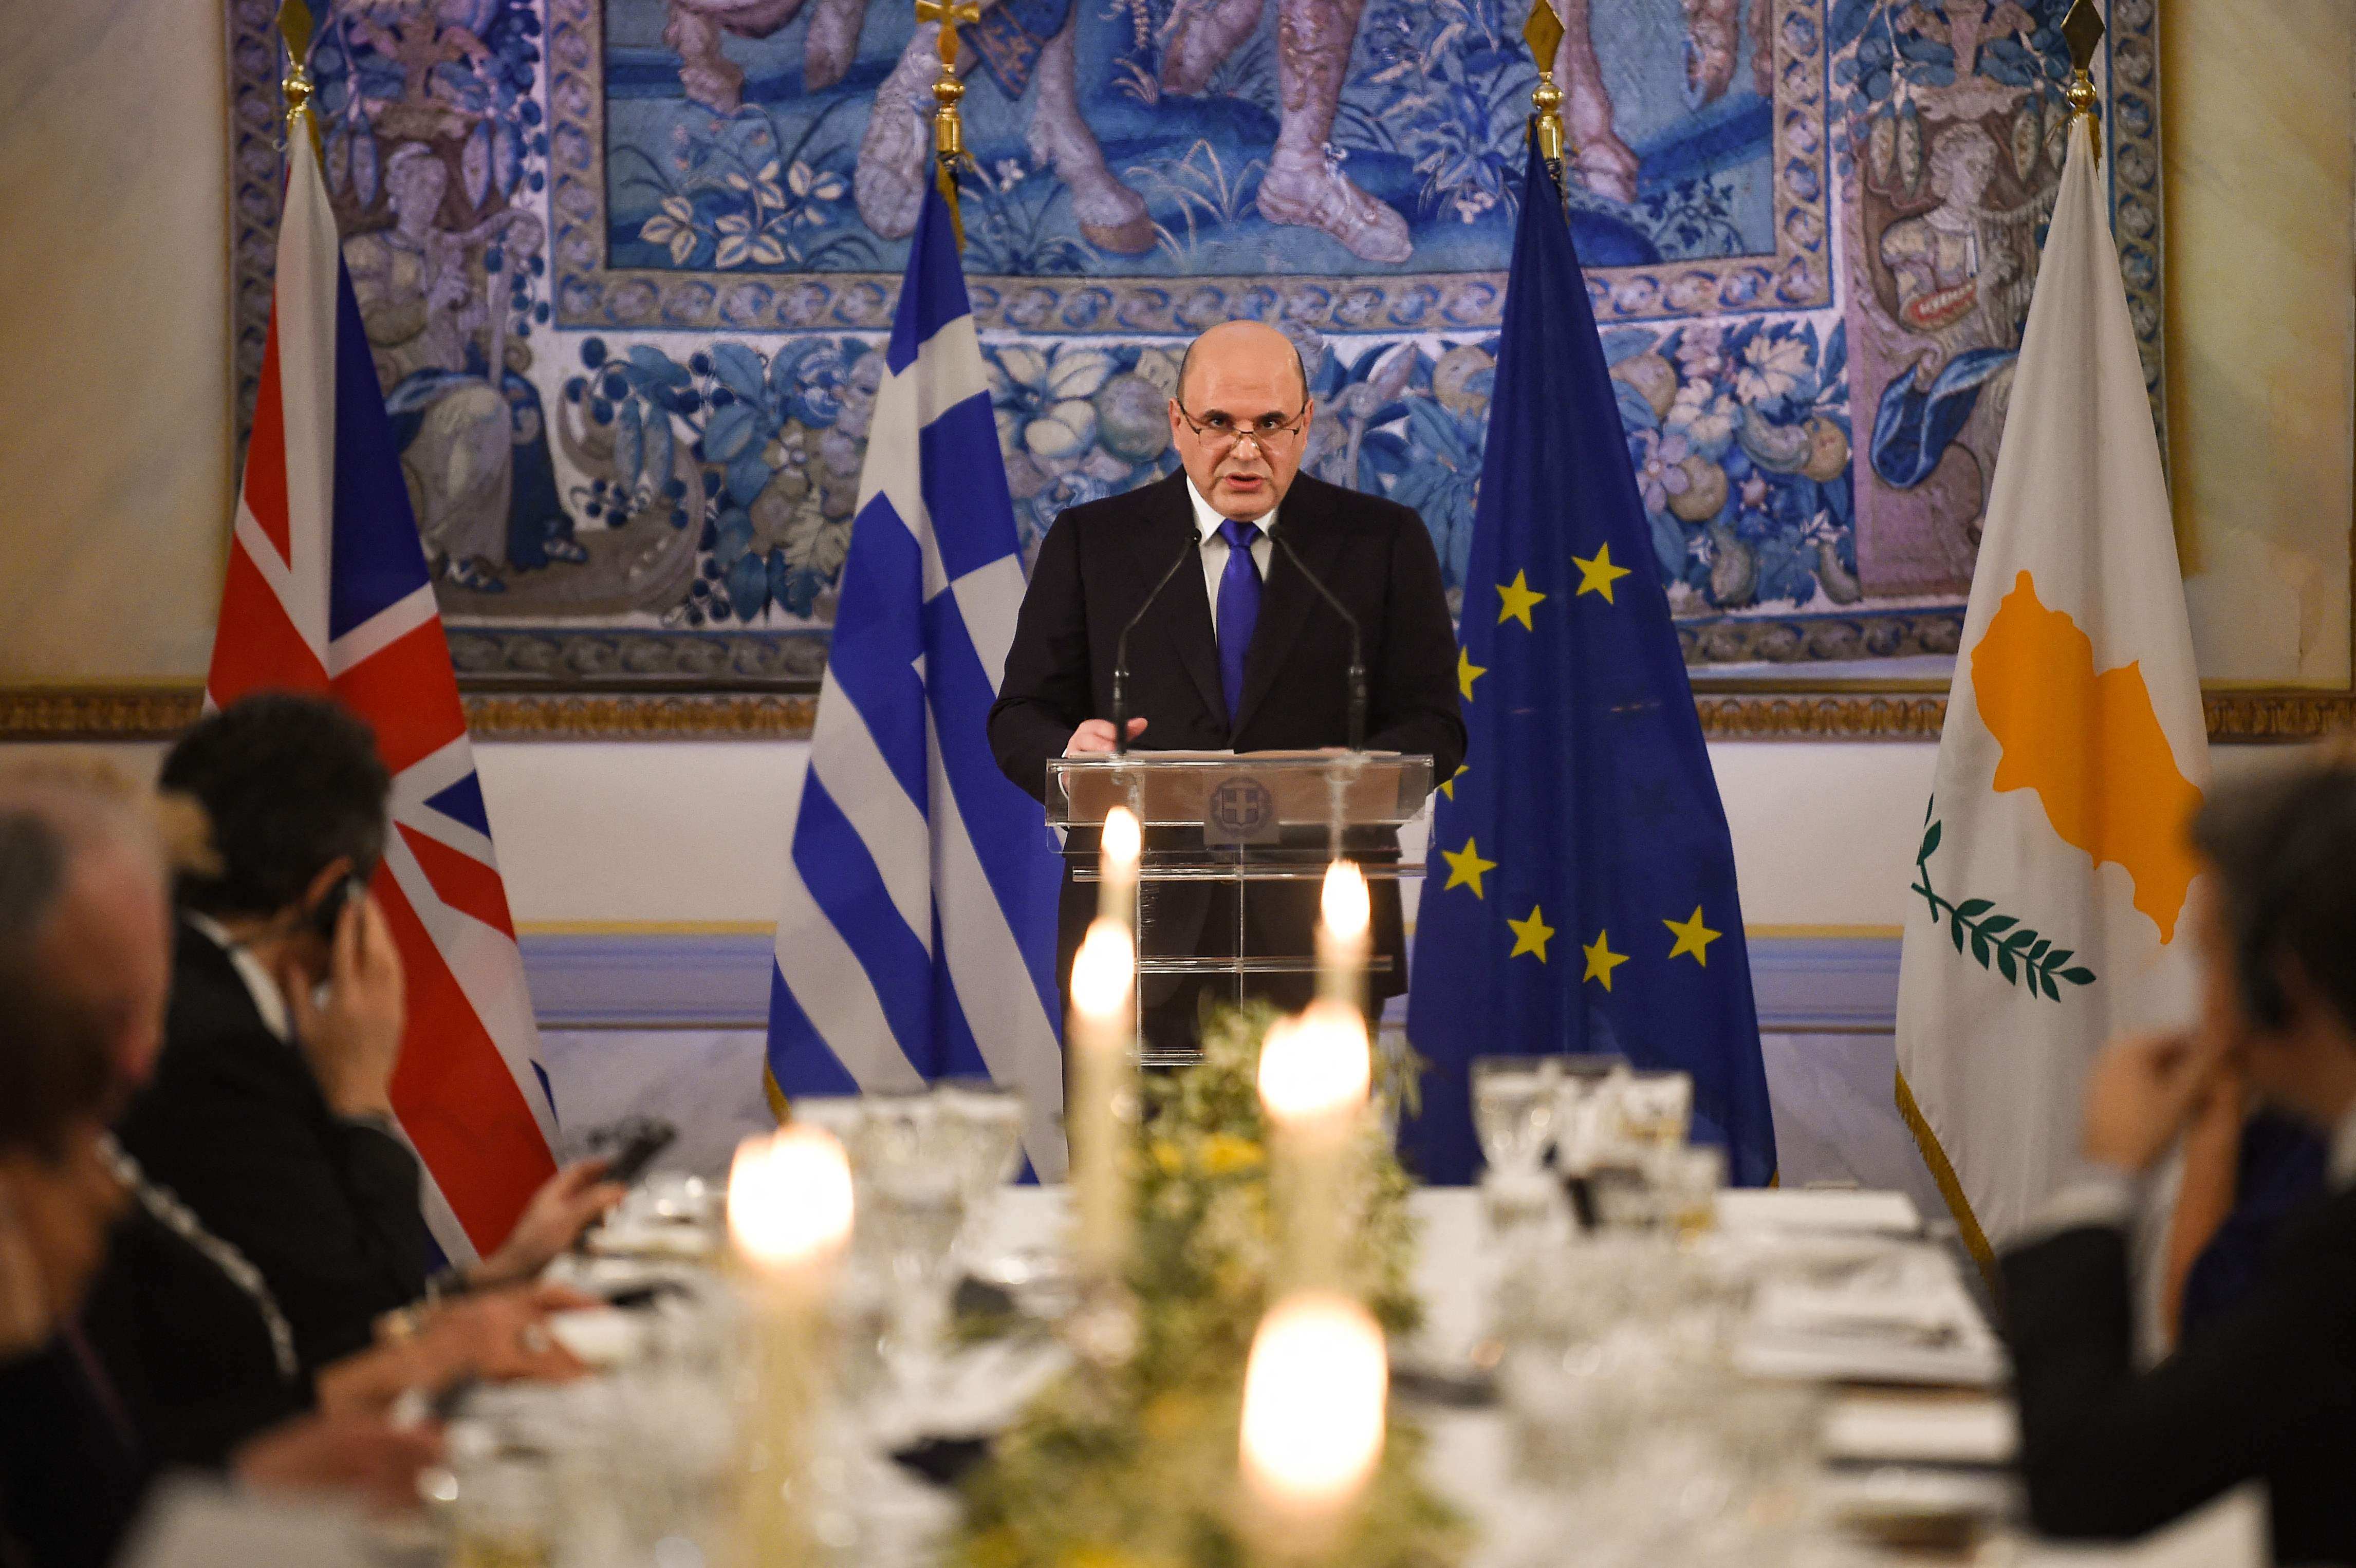 Russian Prime Minister Mikhail Mishustin delivers a speech during an official dinner with the Greek President at the presidential mansion in Athens on March 24, 2021, as Greece celebrates 200th anniversary of 1821 revolution and war of independence. (Photo by ANGELOS TZORTZINIS / POOL / AFP)